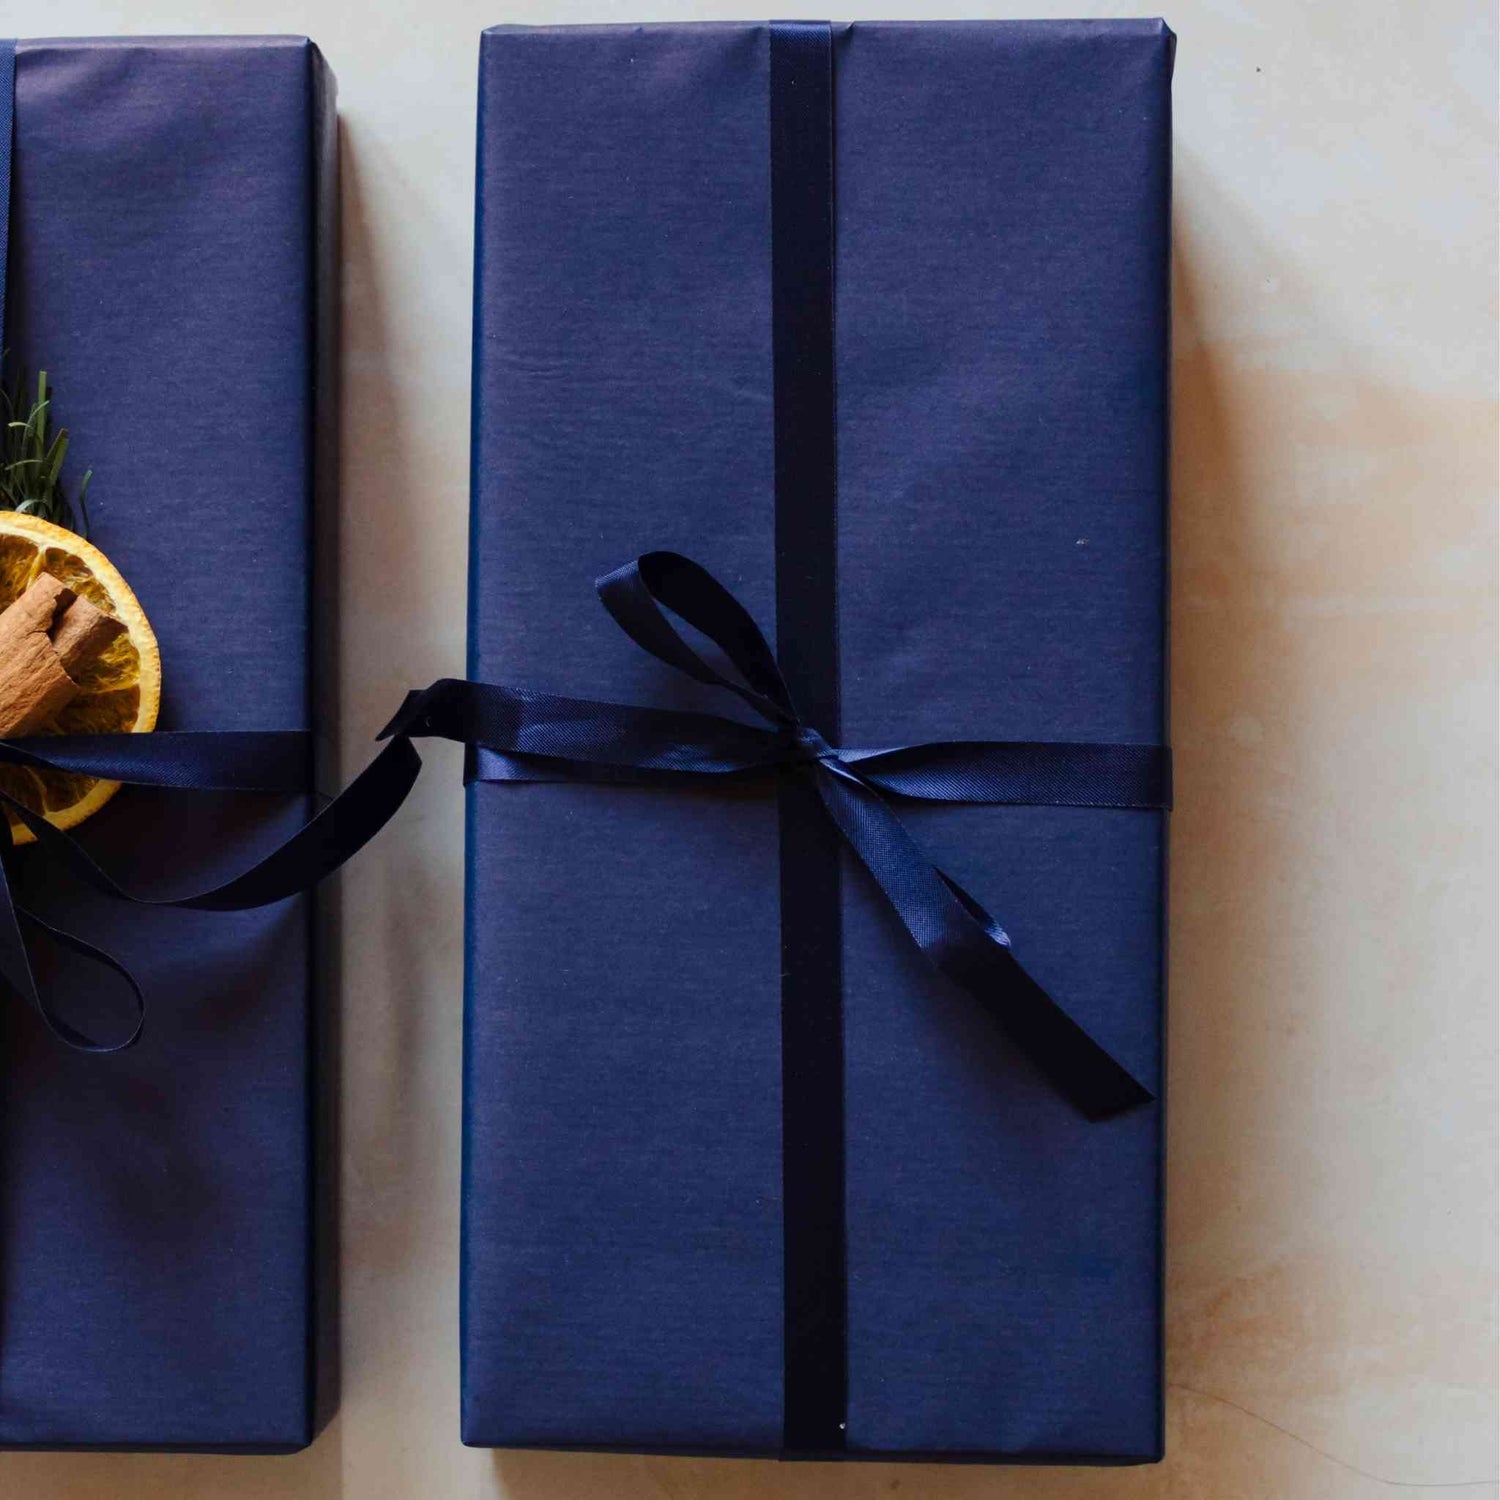 A cotton scented reed diffuser from the Home County Co. is shown with luxury Gift Wrap. The reed diffuser is wrapped in luxury navy wrapping paper secured with navy ribbon.